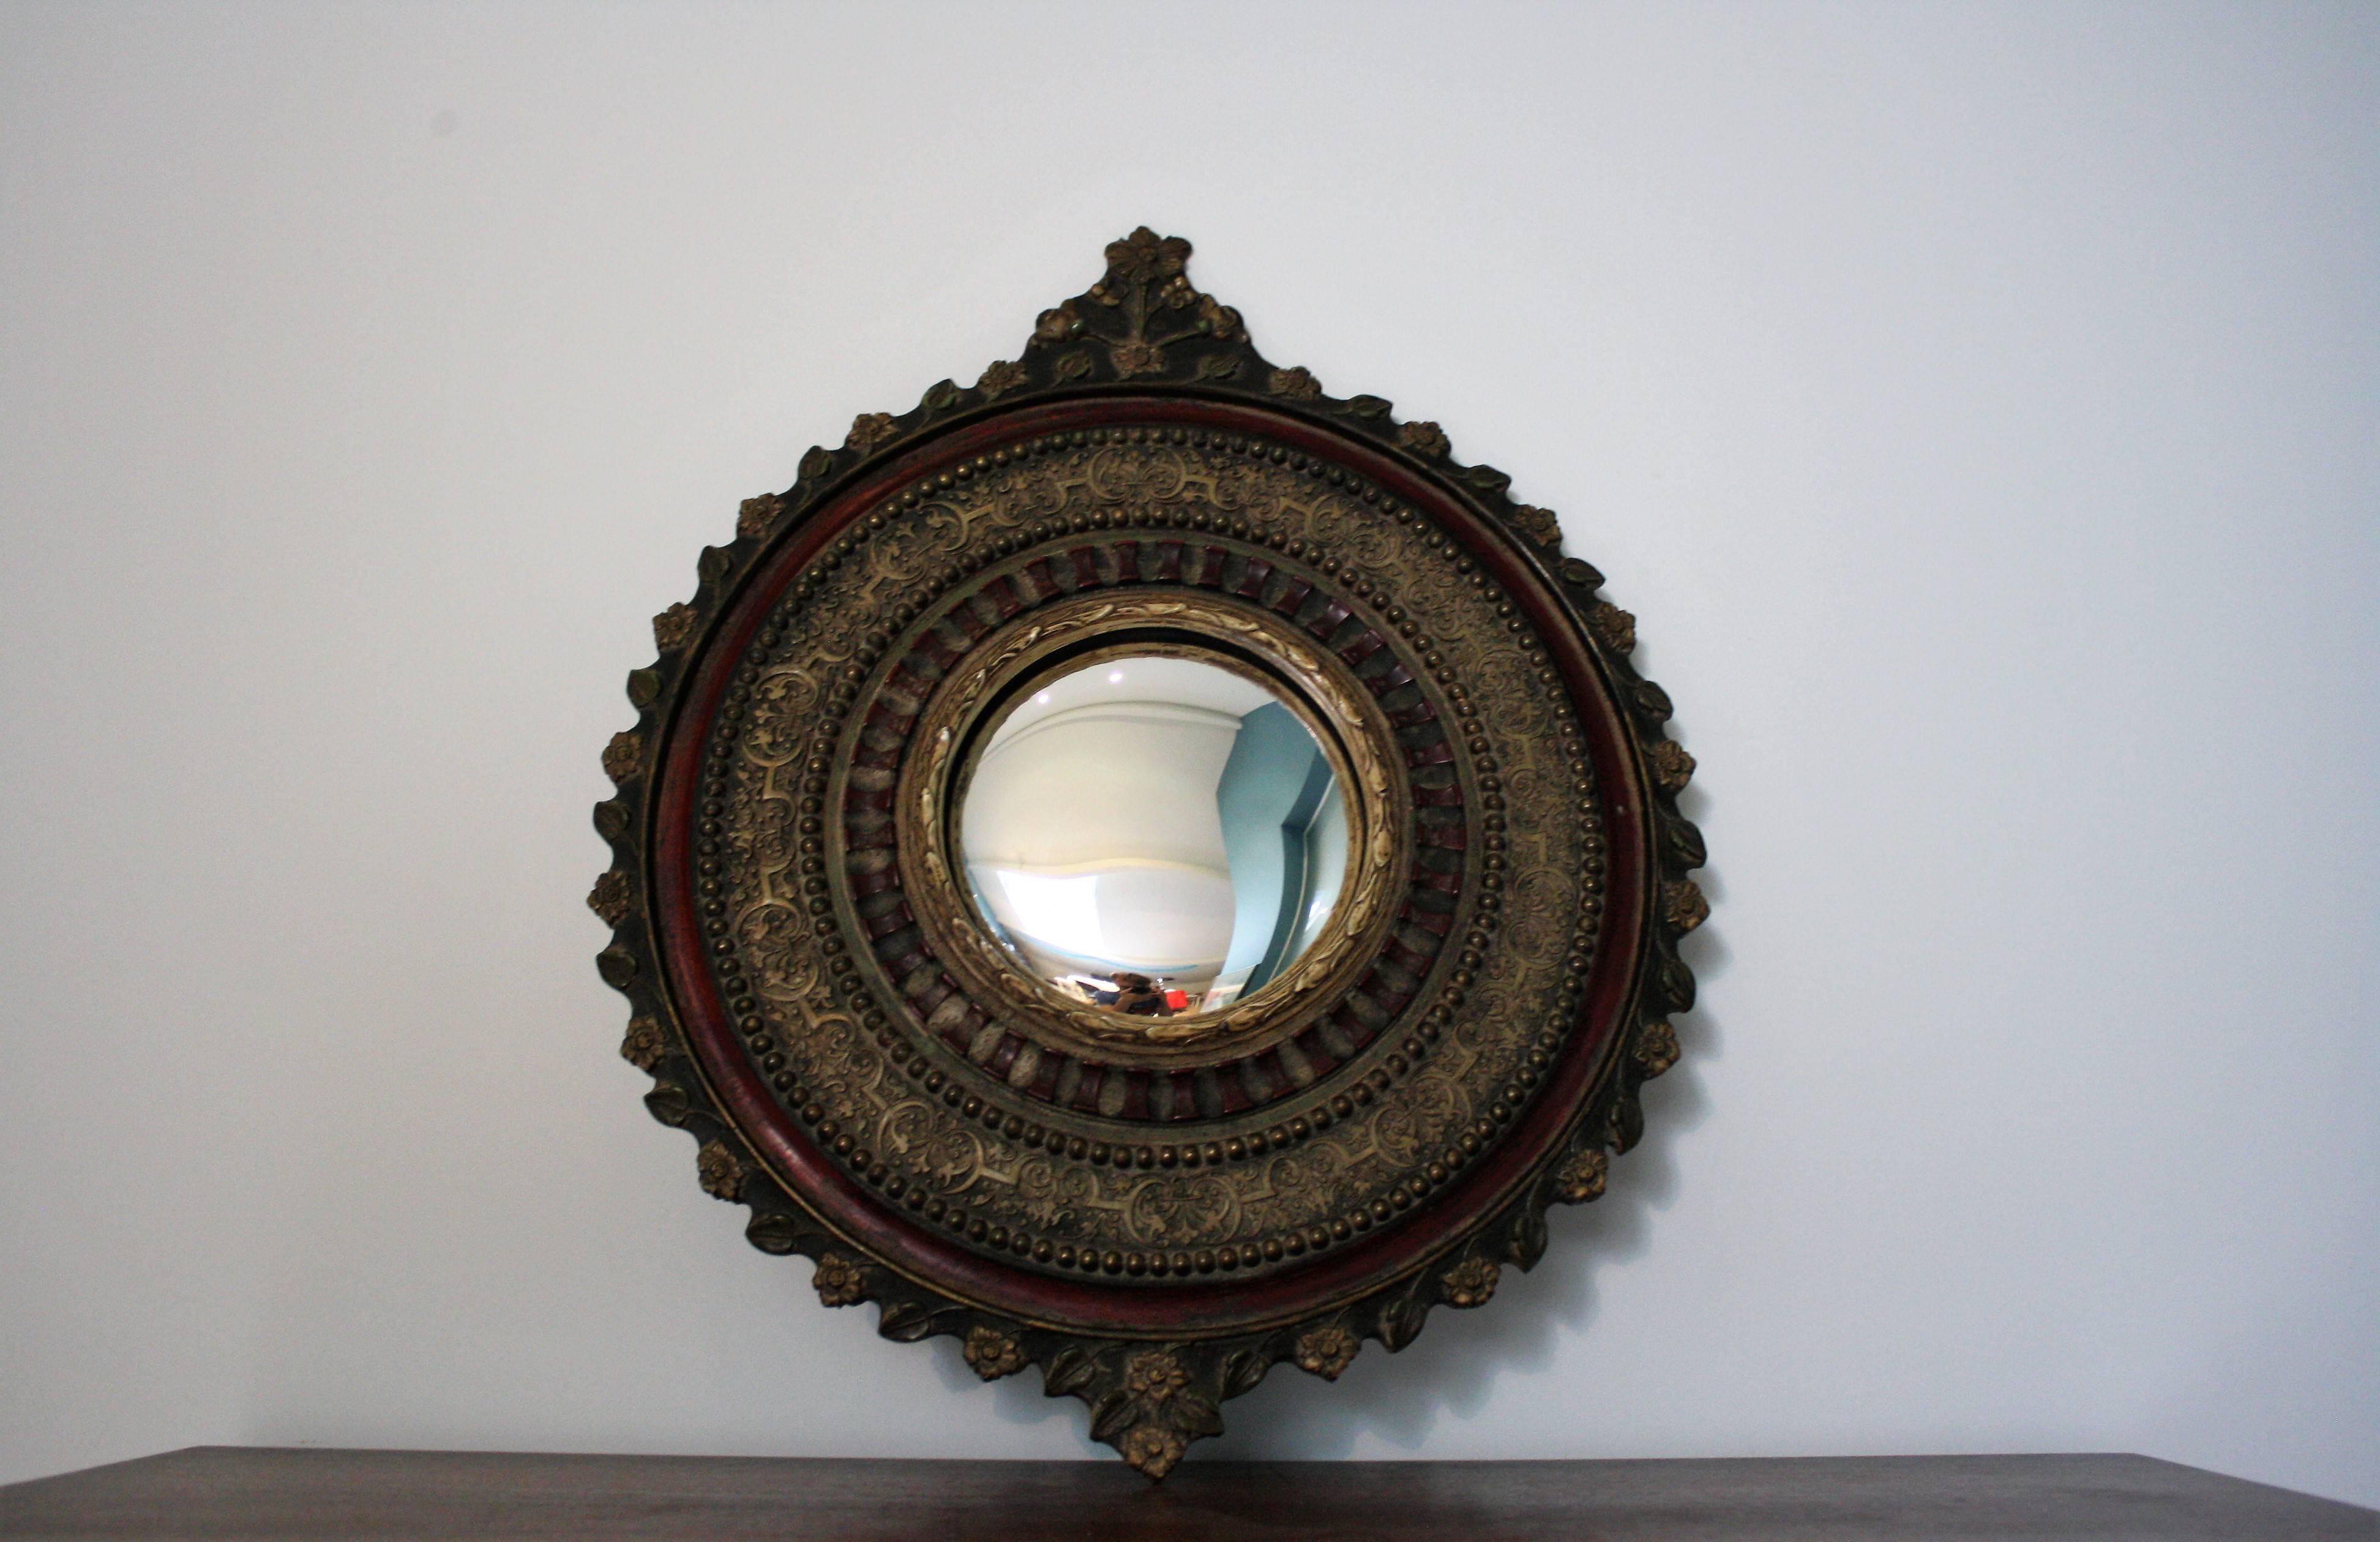 Vintage decorated convex mirror or butlers mirror.

The mirror is made from gilded resin and is decorated with flowers.

1950s, France

Diameter: 45cm/18".